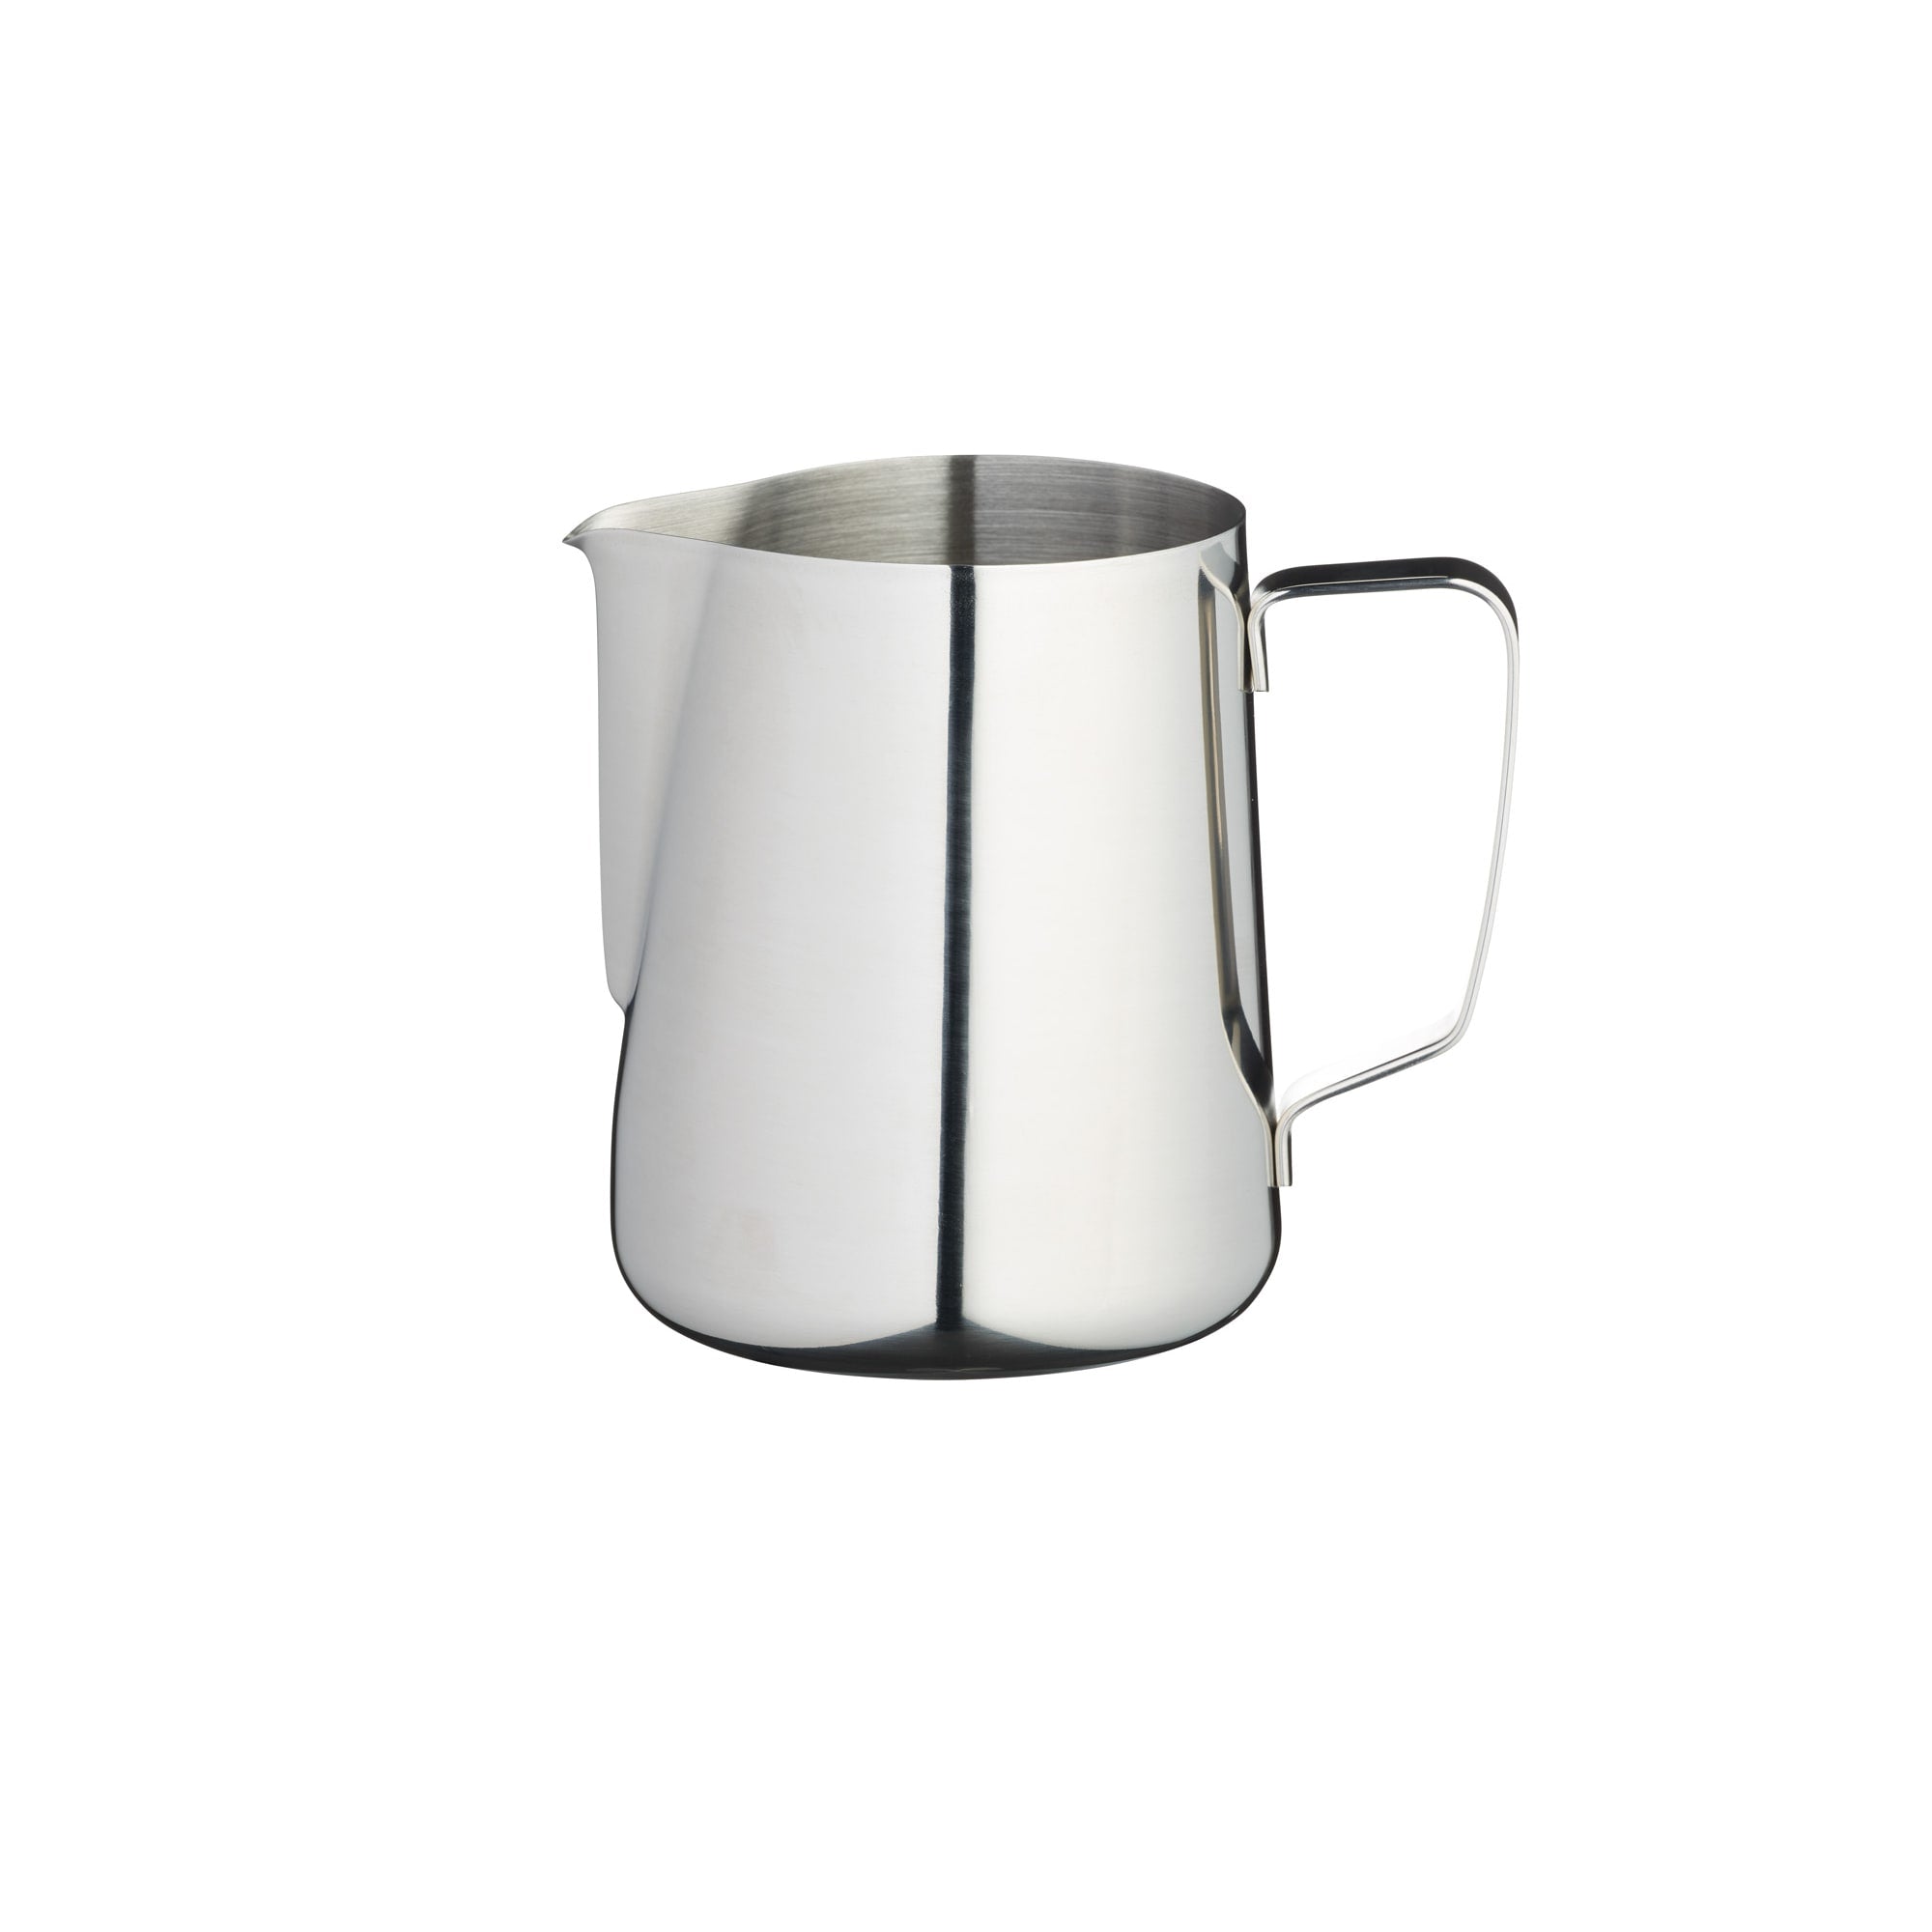 Le'Xpress Stainless Steel 600ml Milk Steaming Jug / Milk Frothing Jug - The Cooks Cupboard Ltd